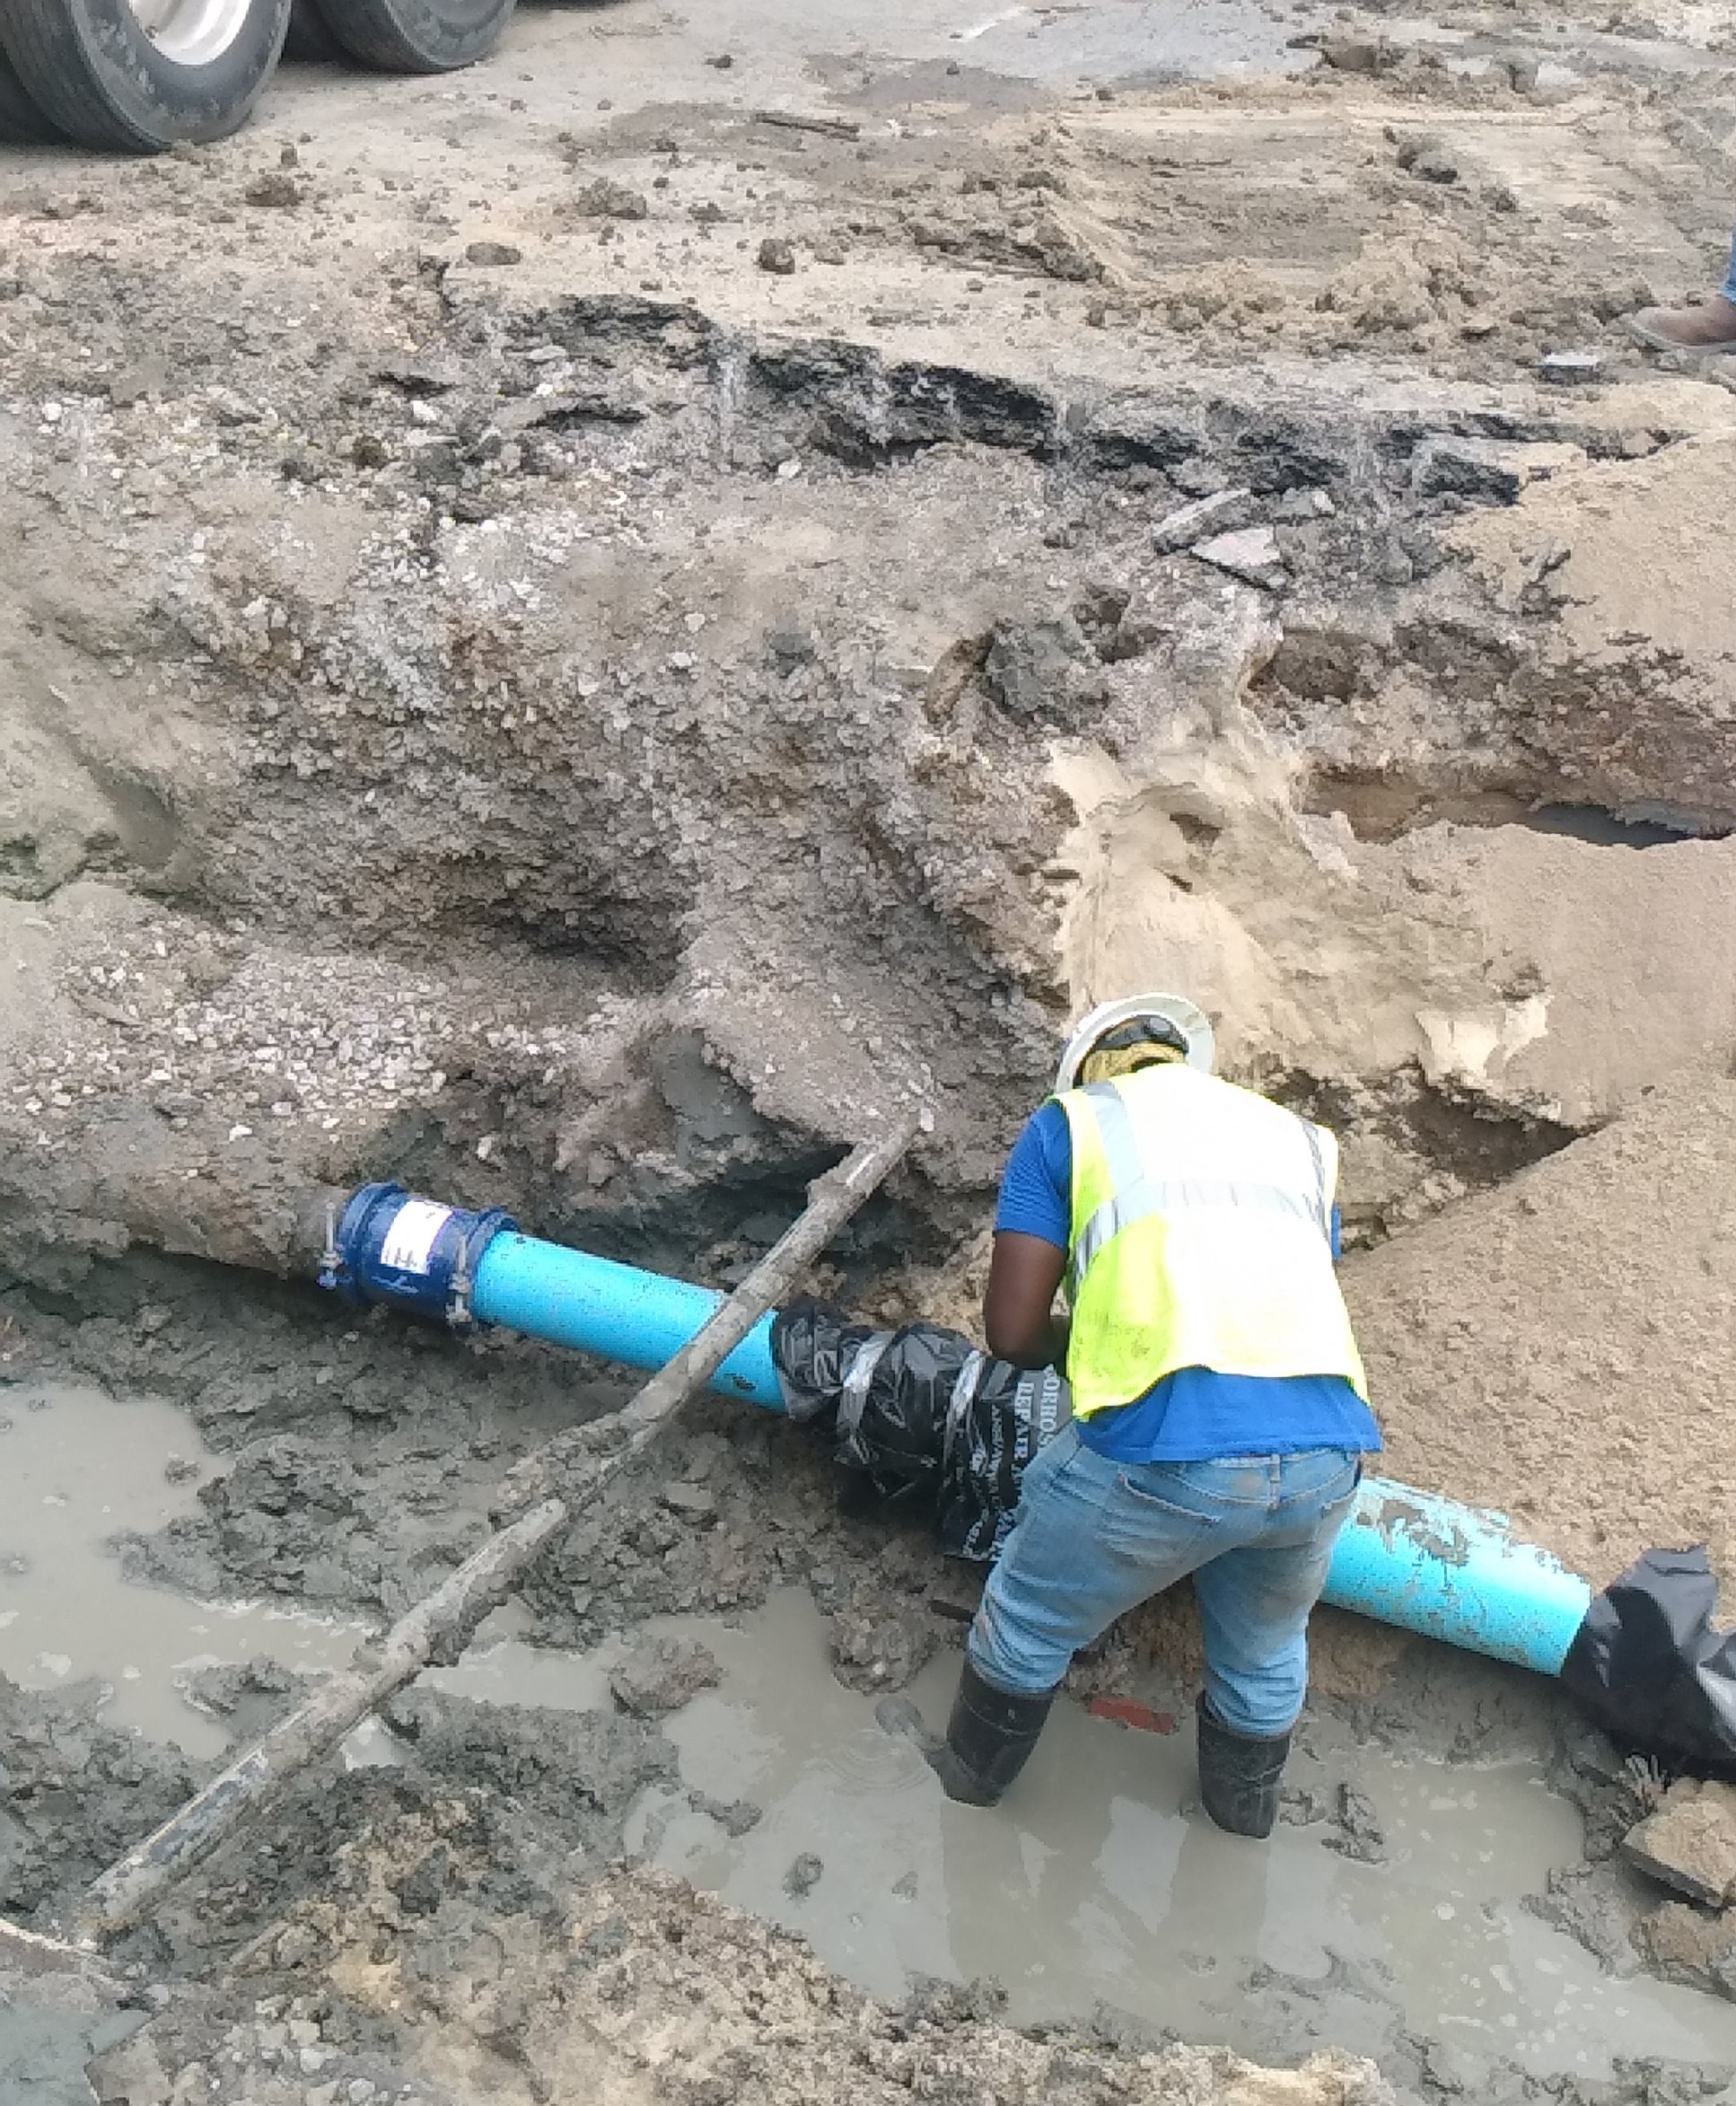 WATER LINE WORK UNDERWAY ON THE AUDUBON GROUP A PROJECT